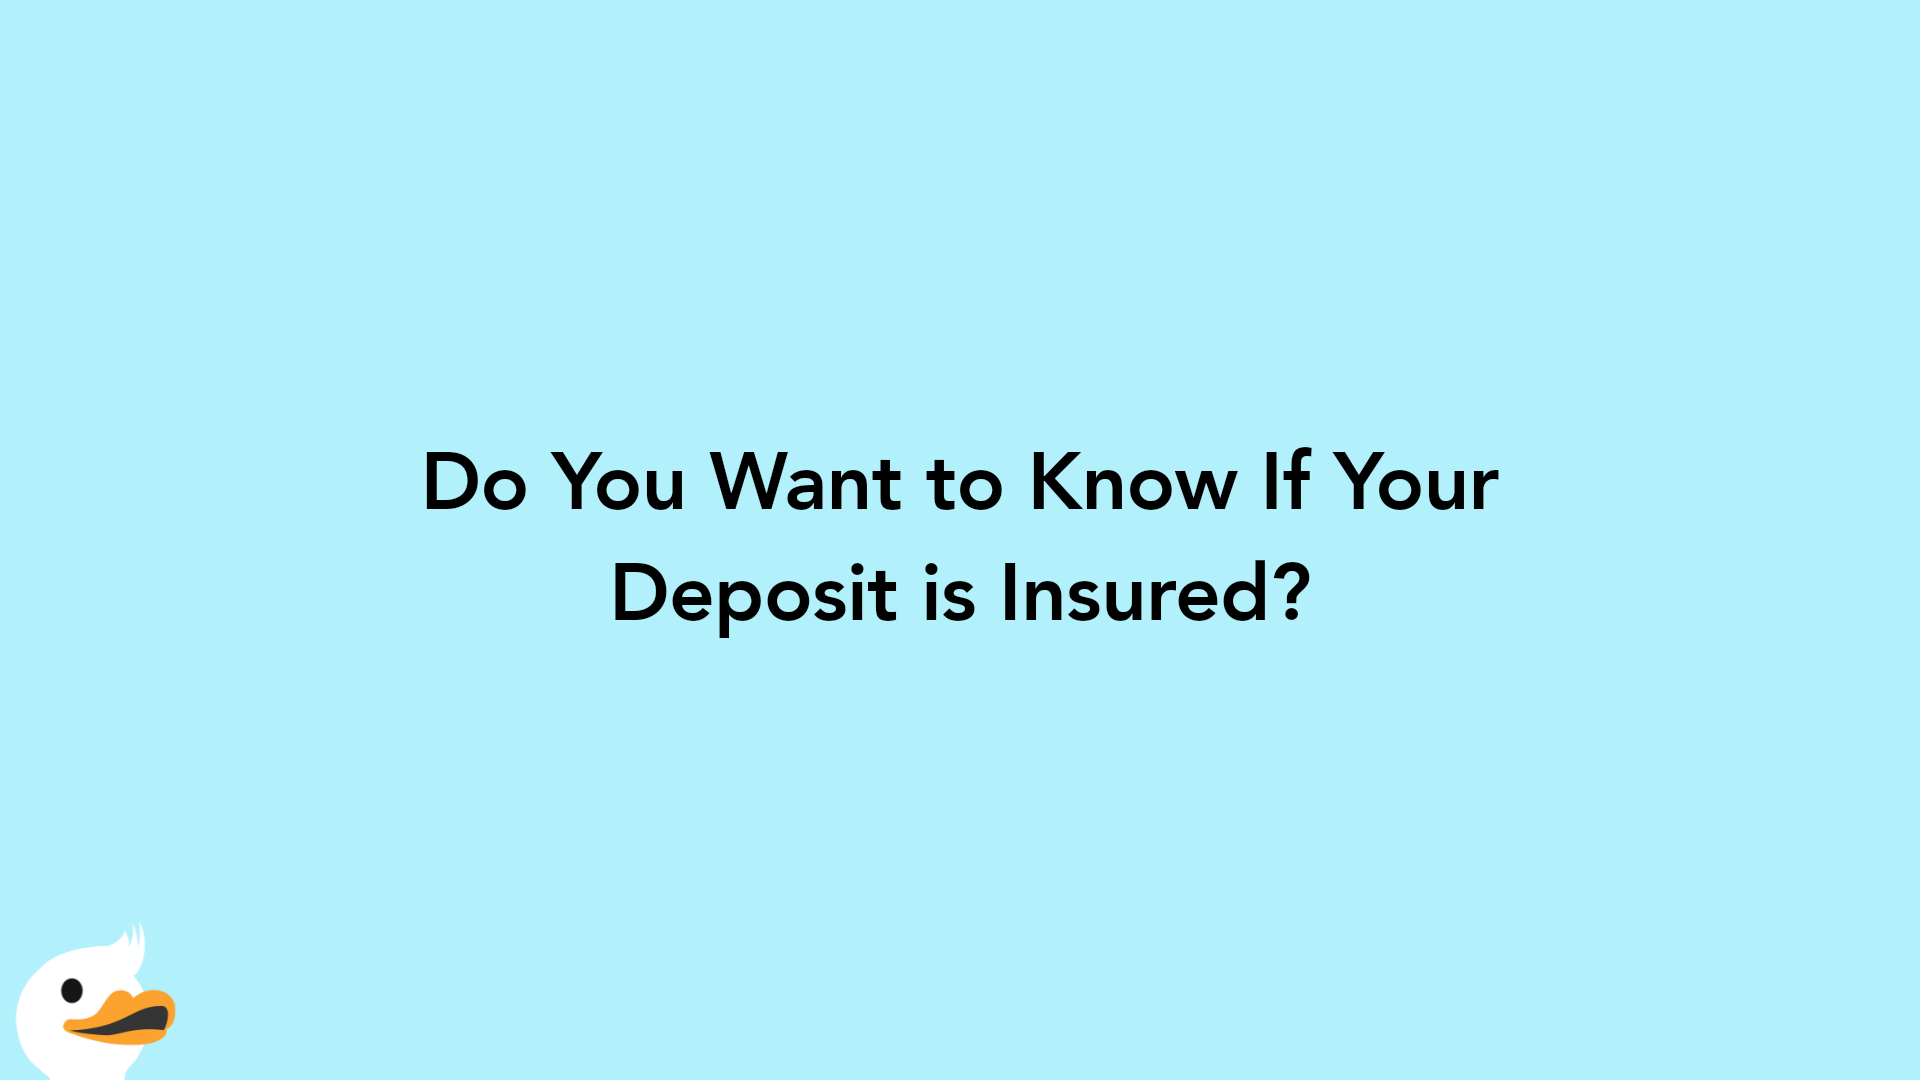 Do You Want to Know If Your Deposit is Insured?